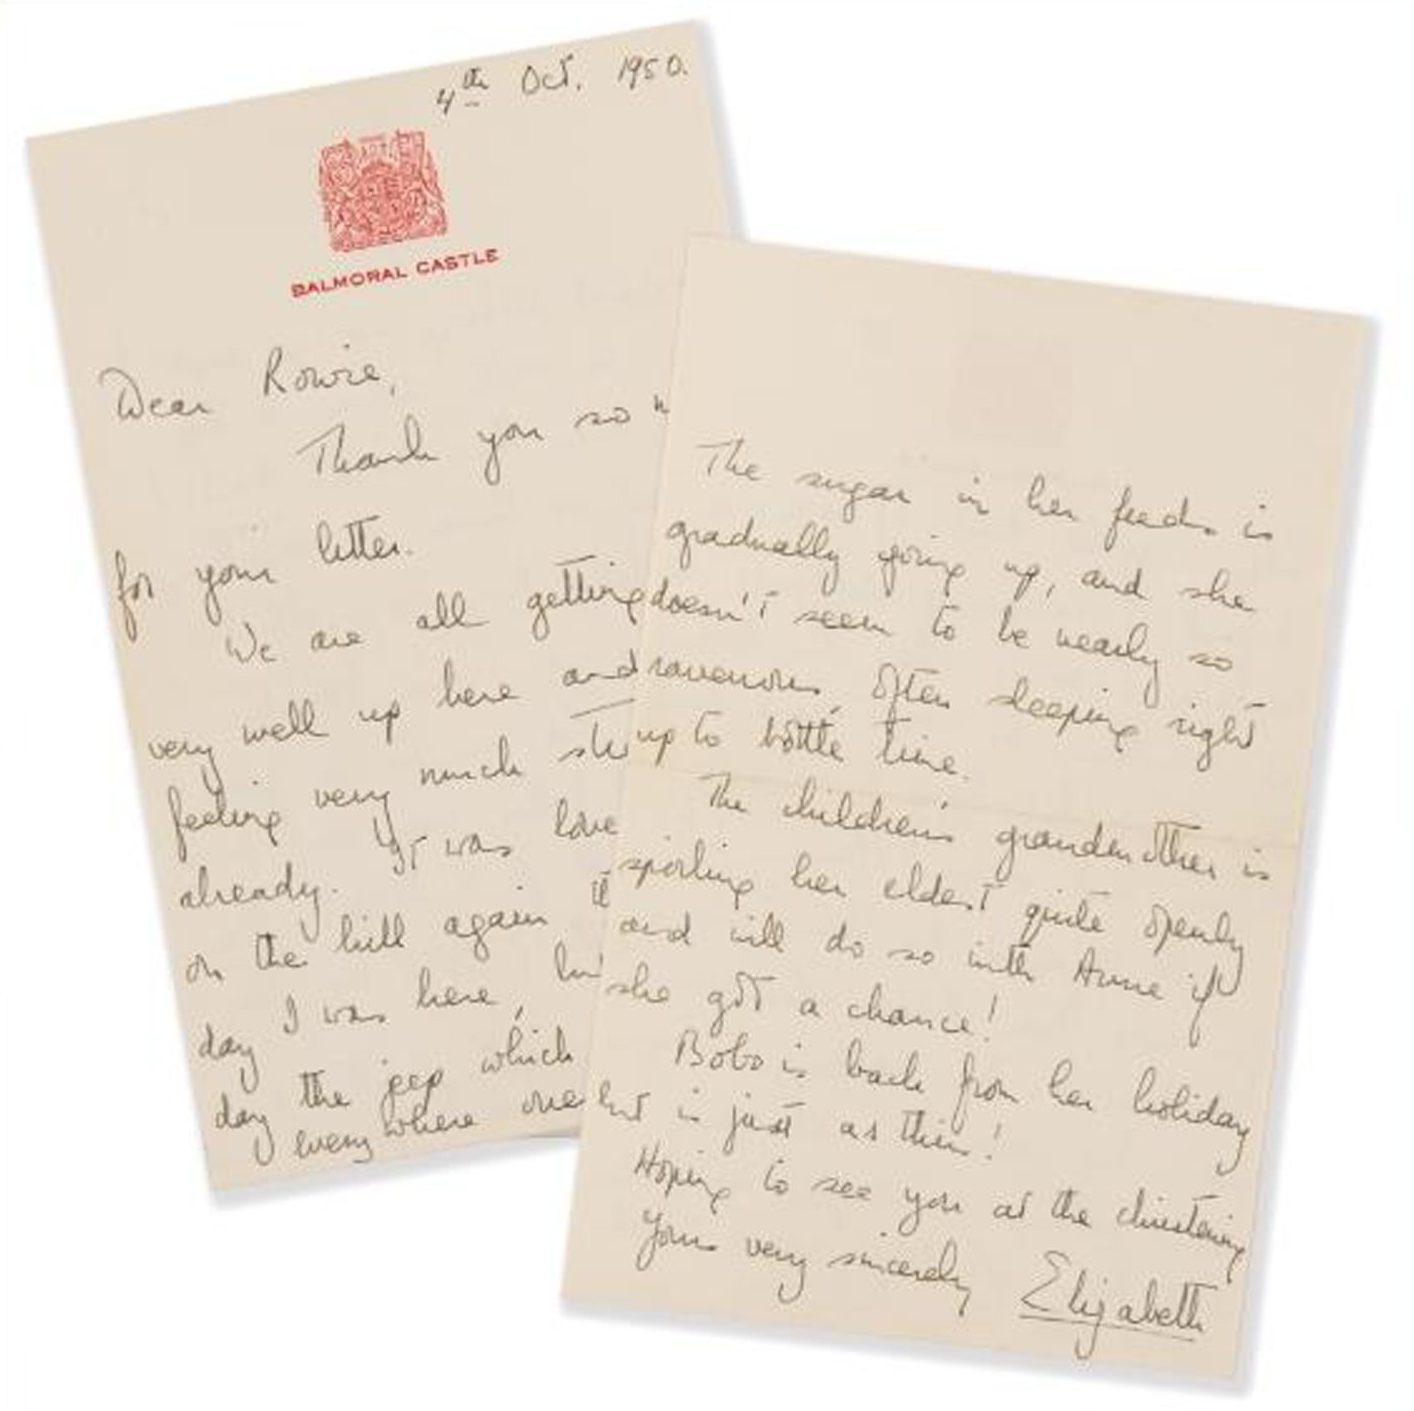 Two pages of letter written by Queen Elizabeth 